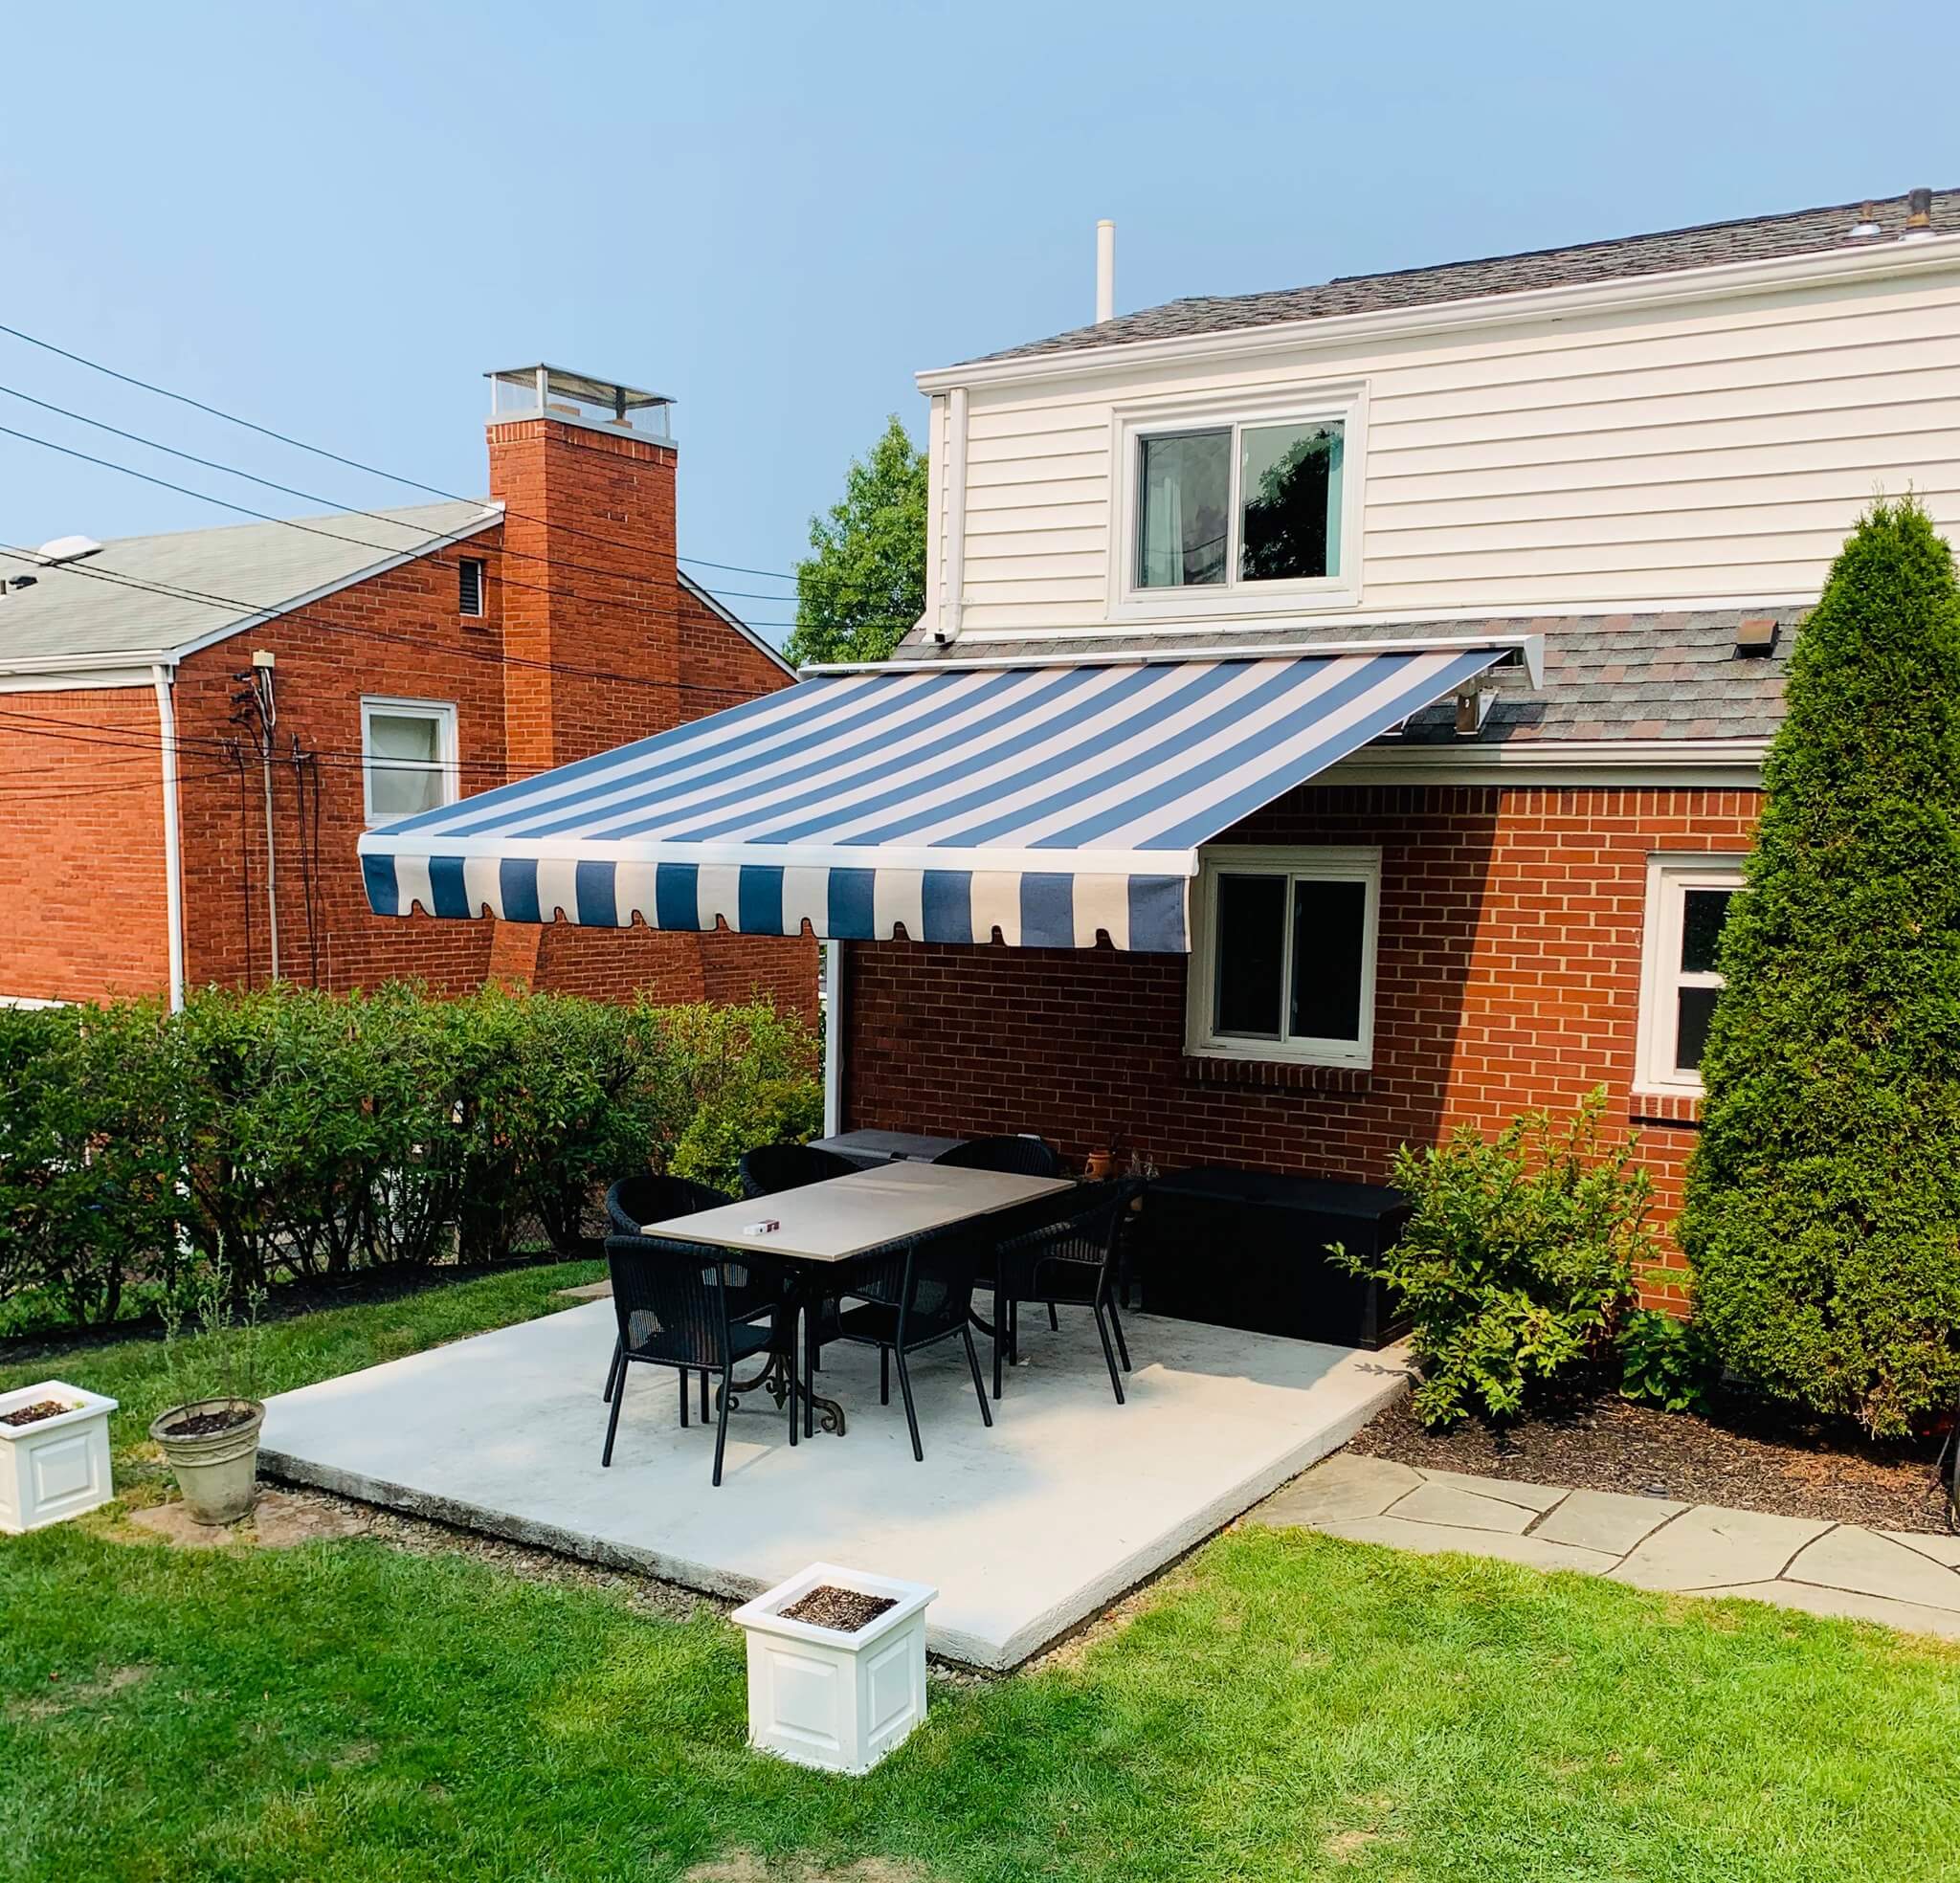 Mt Lebanon Roof Mount Retractable Awning